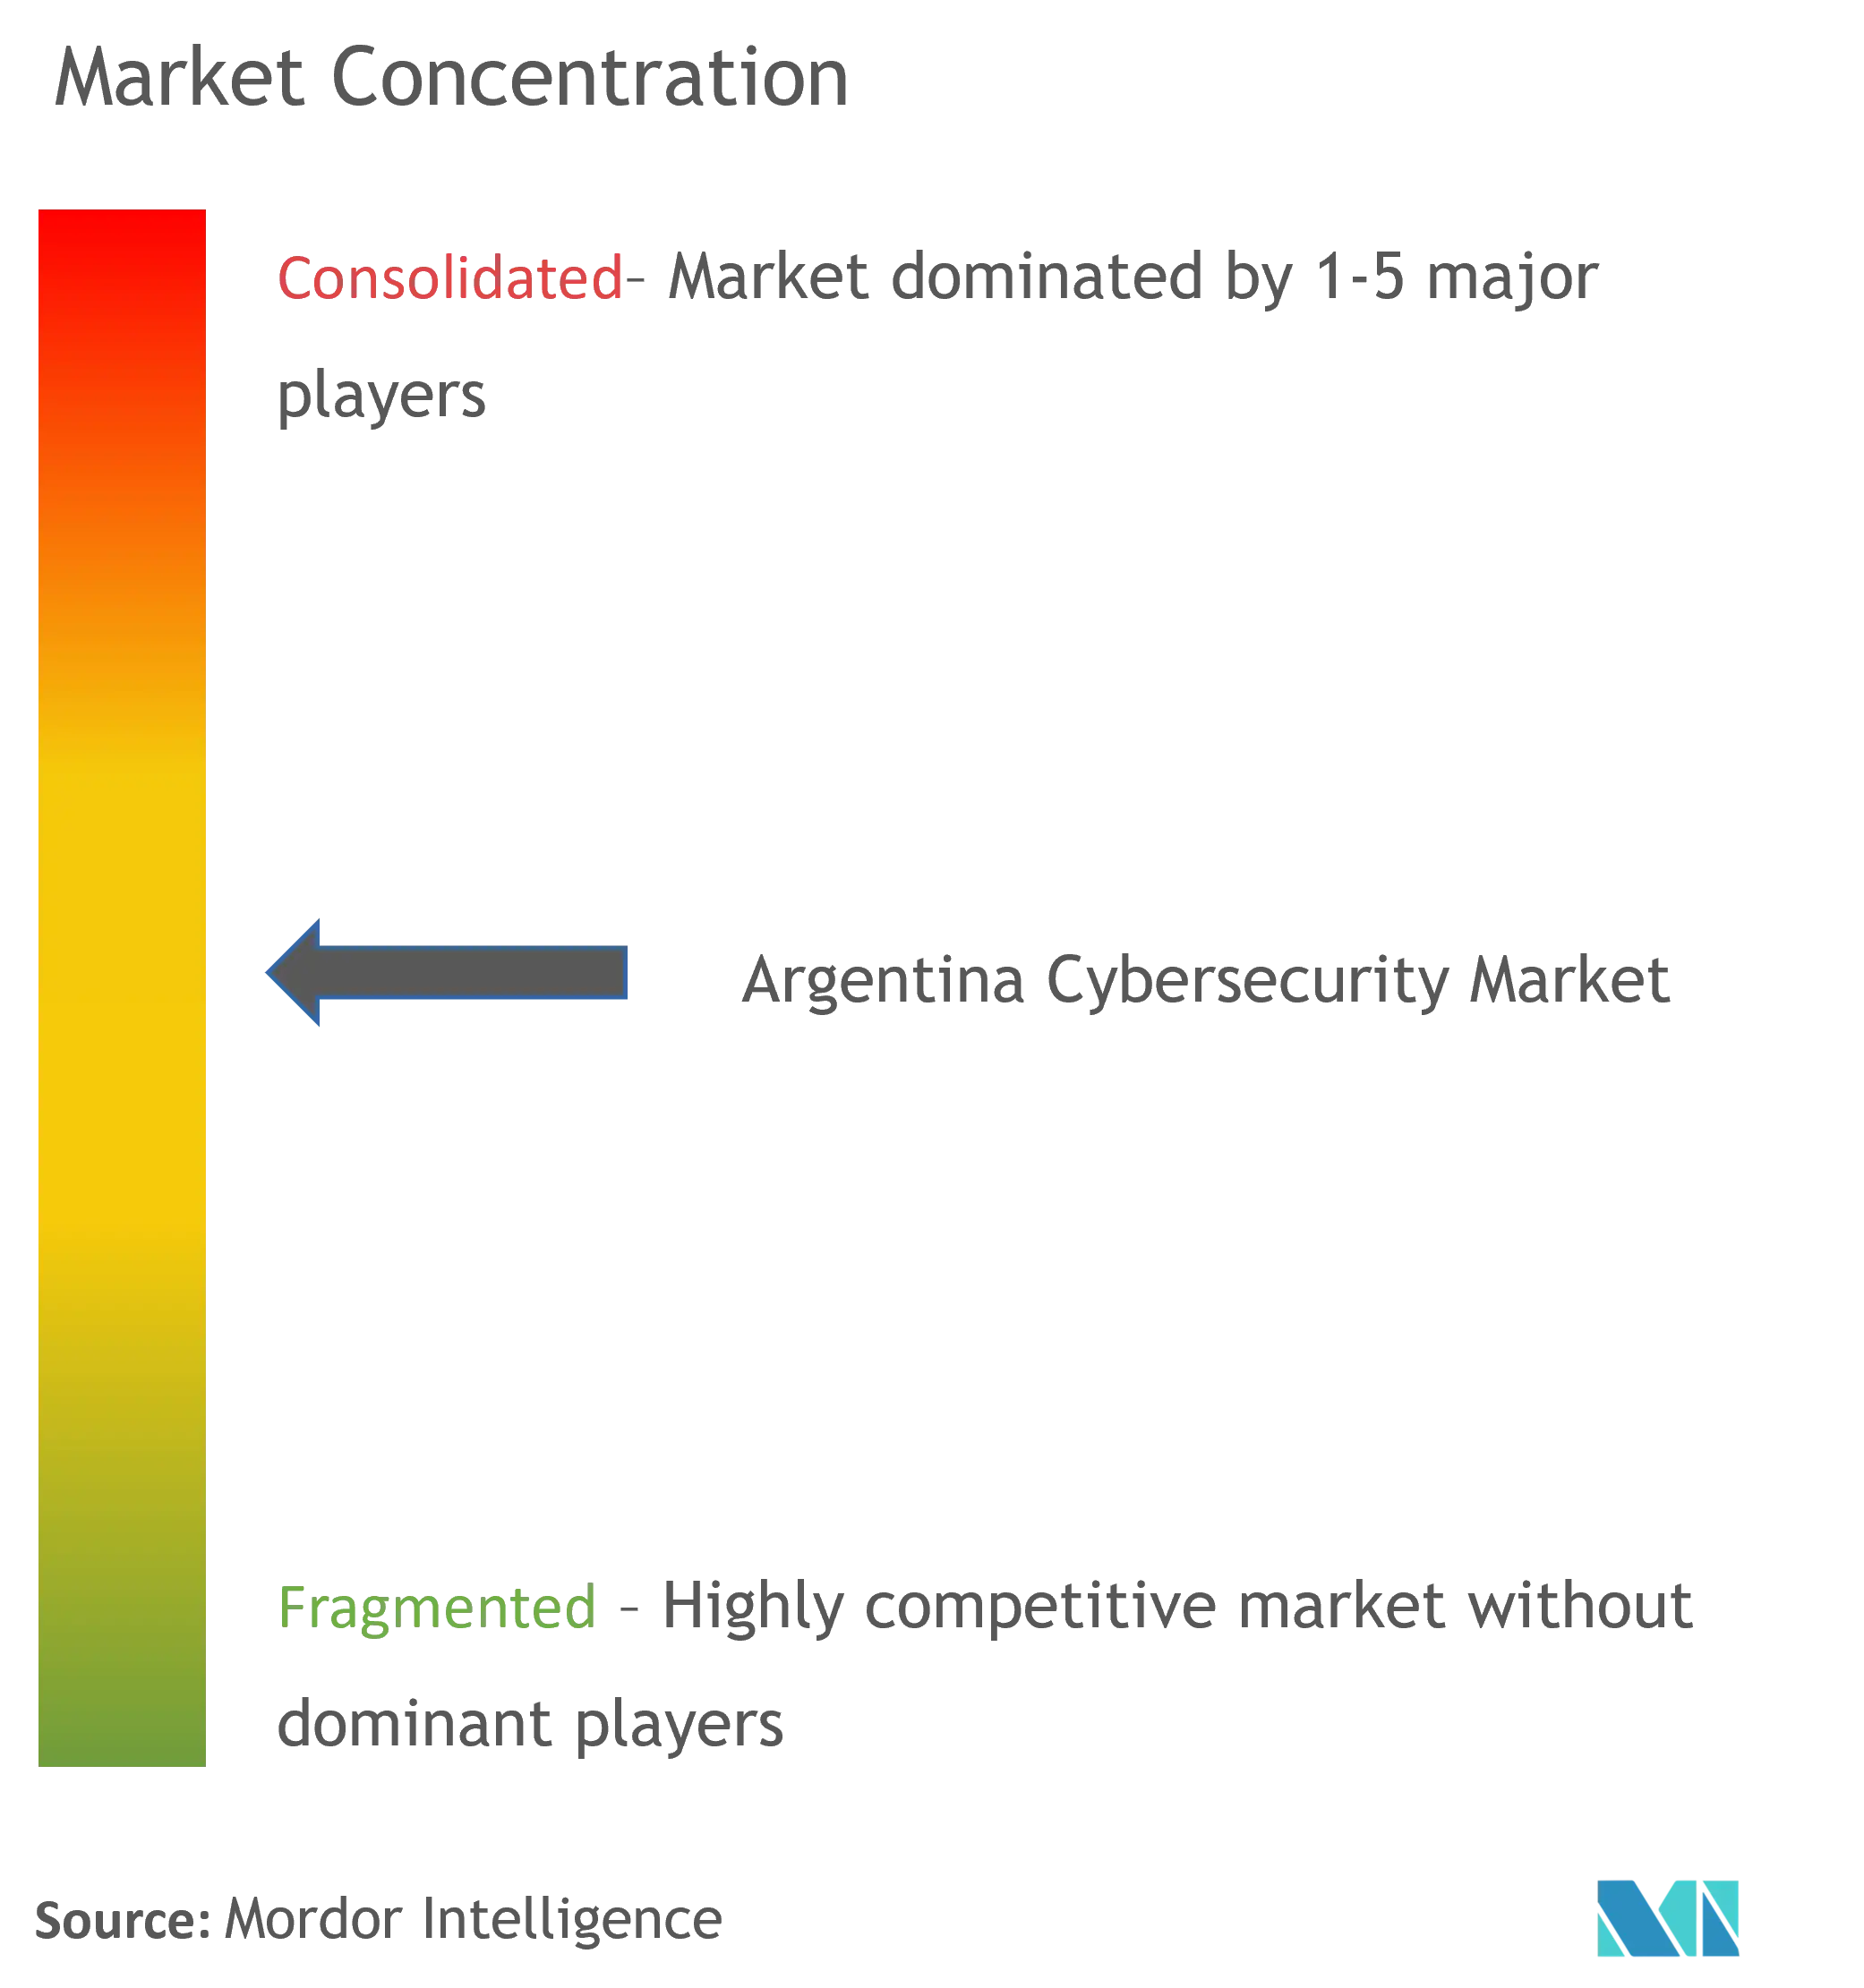 Argentina Cybersecurity Market Concentration